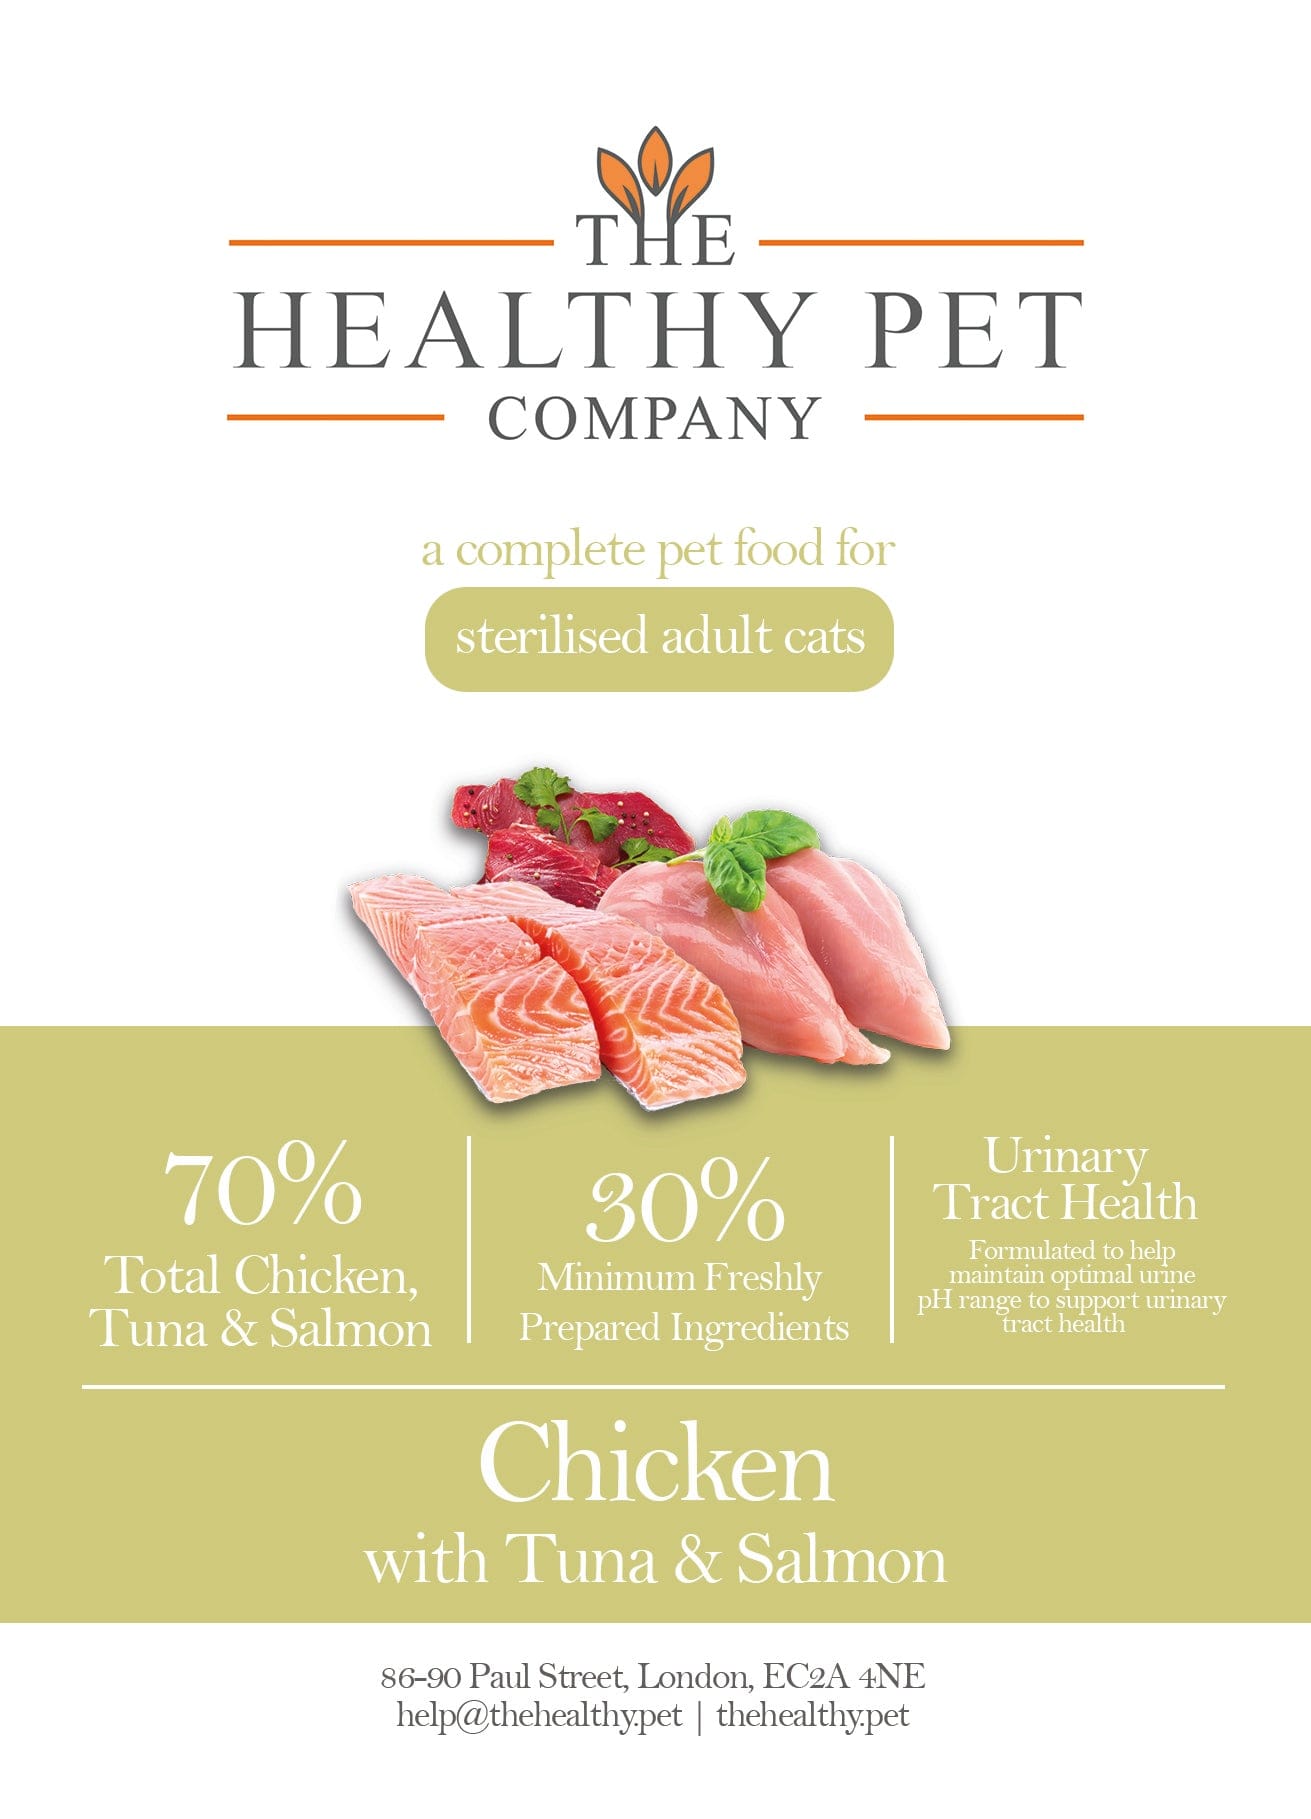 The Healthy Pet Company Complete Meal - Chicken, Salmon & Tuna for Sterilised Adult Cats - The Healthy Pet Company